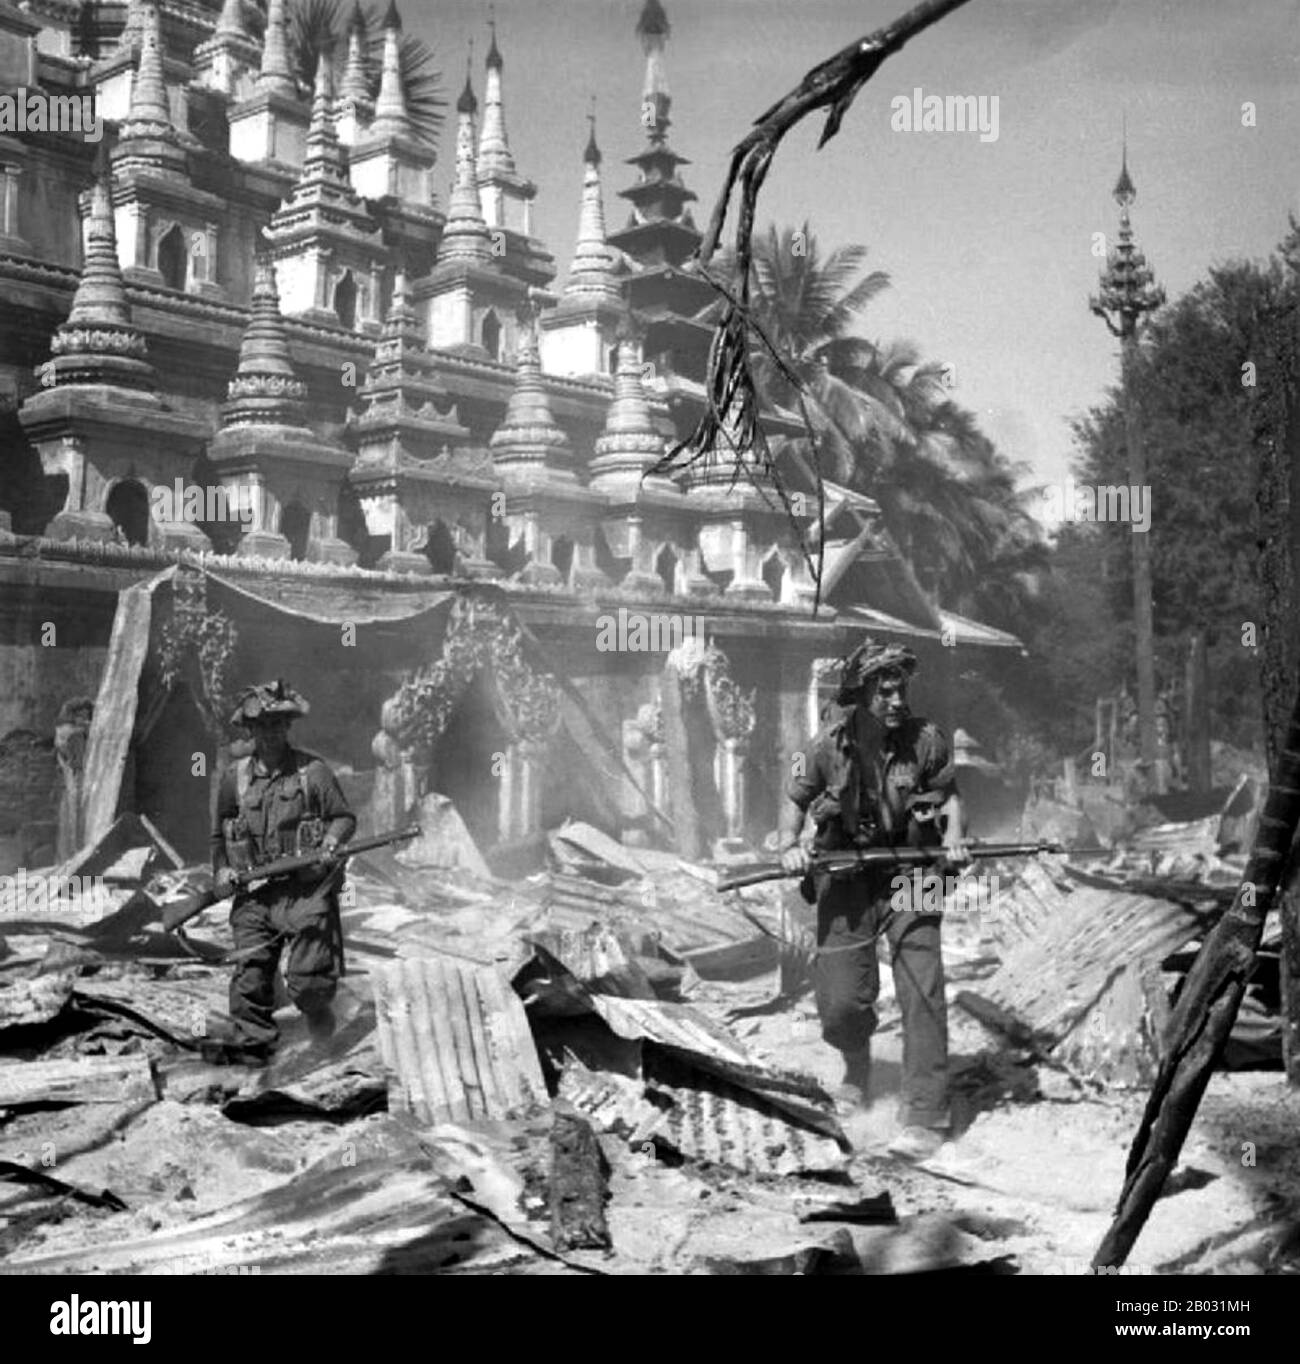 A major battleground, Burma was devastated during World War II. By March 1942, within months after they entered the war, Japanese troops had advanced on Rangoon and the British administration had collapsed. A Burmese Executive Administration headed by Ba Maw was established by the Japanese in August 1942.  Wingate's British Chindits were formed into long-range penetration groups trained to operate deep behind Japanese lines. A similar American unit, Merrill's Marauders, followed the Chindits into the Burmese jungle in 1943. Beginning in late 1944, allied troops launched a series of offensives Stock Photo